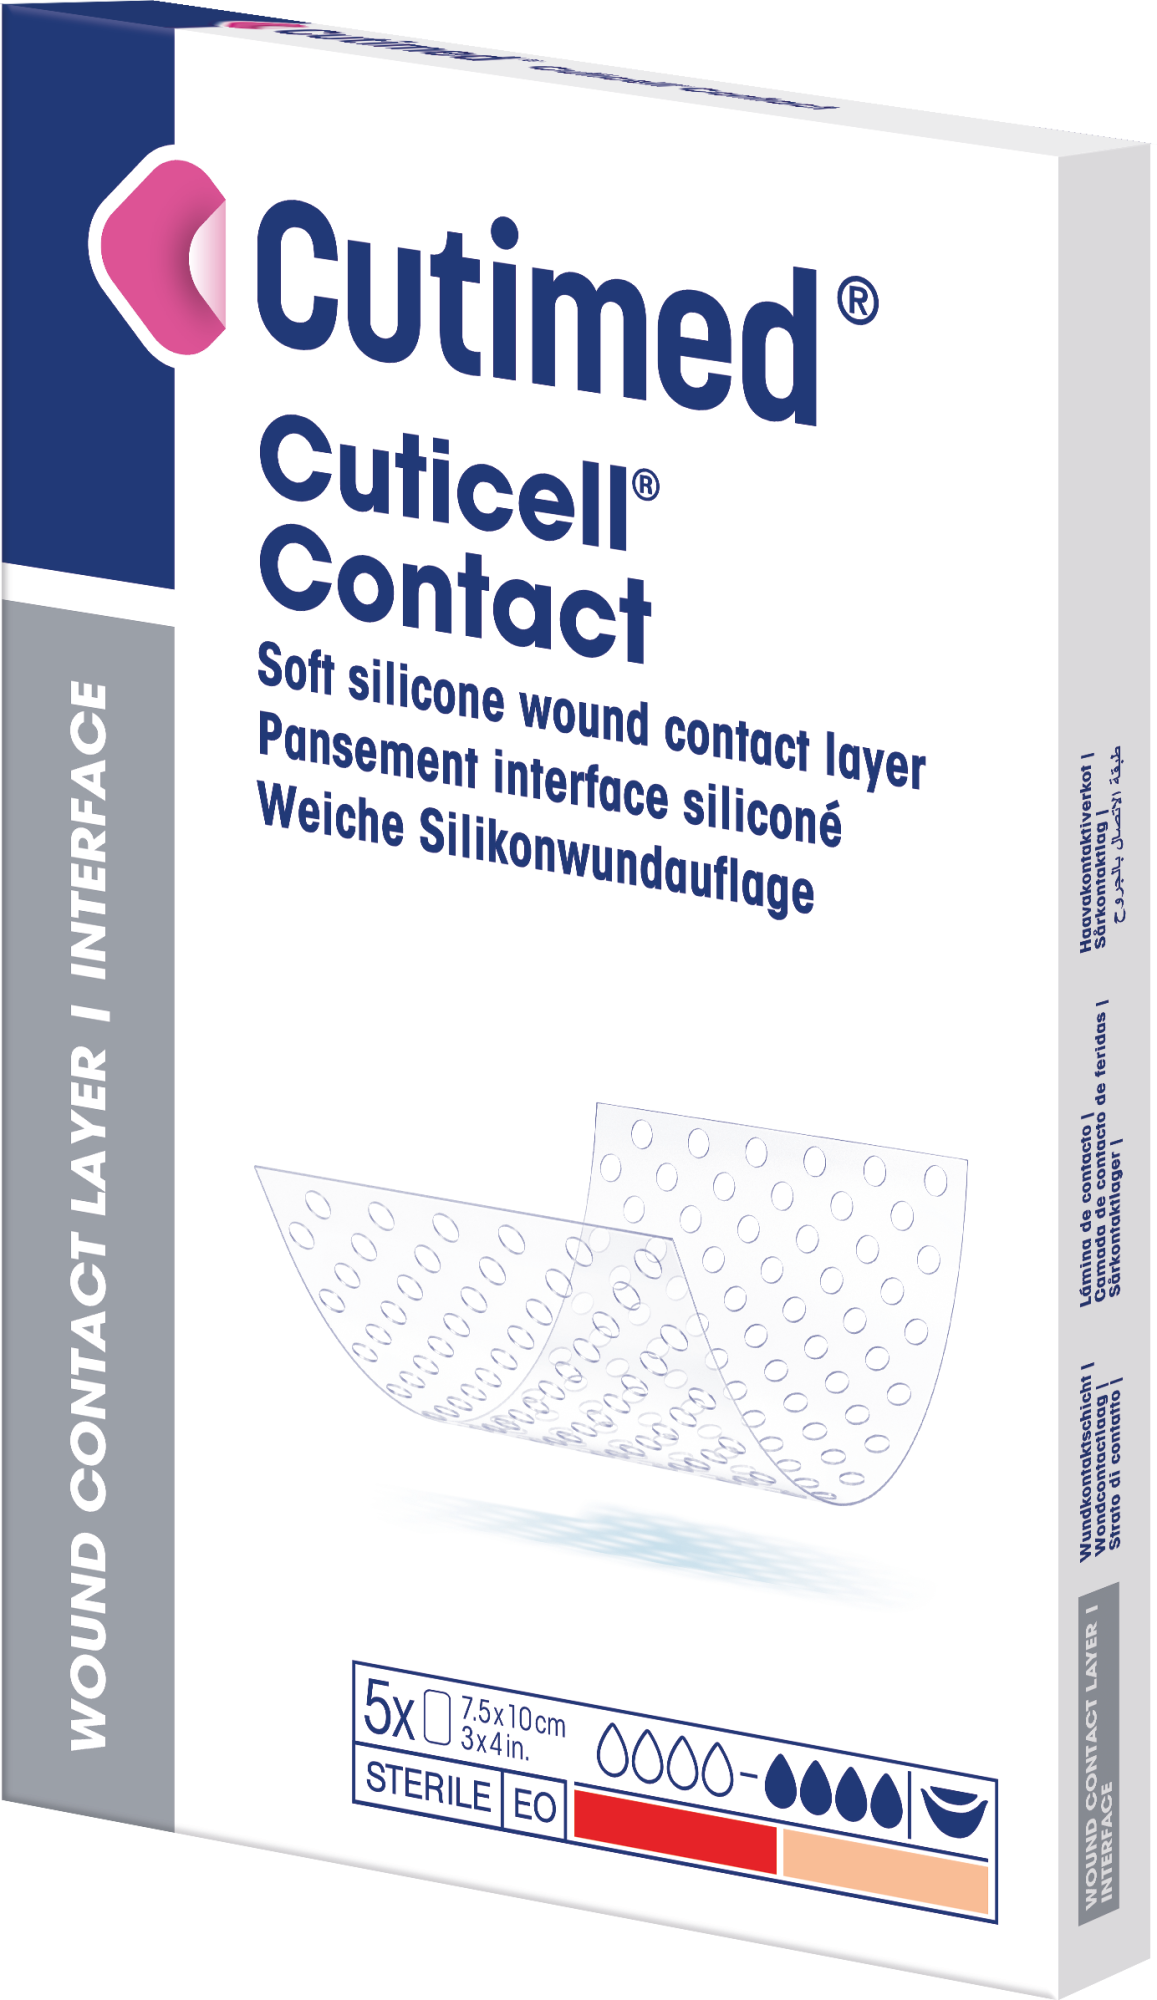 Image showing a packshot of Cutimed® Cuticell® Contact